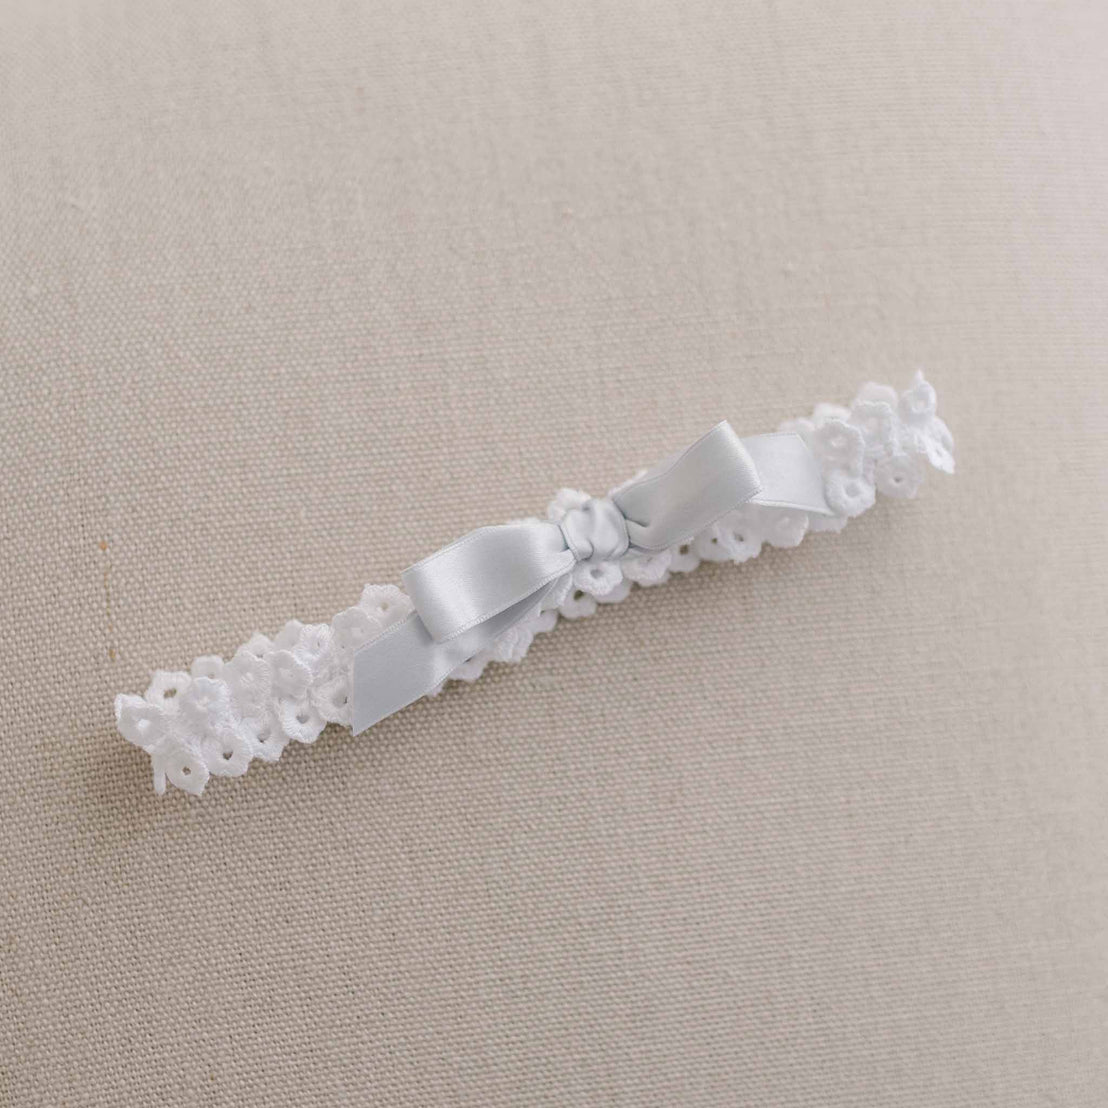 A delicate Olivia Headband made of white lace with floral patterns and a silky white ribbon tied in a bow, set against a neutral beige background, perfect for boutique baptism collections or as an heirloom piece.